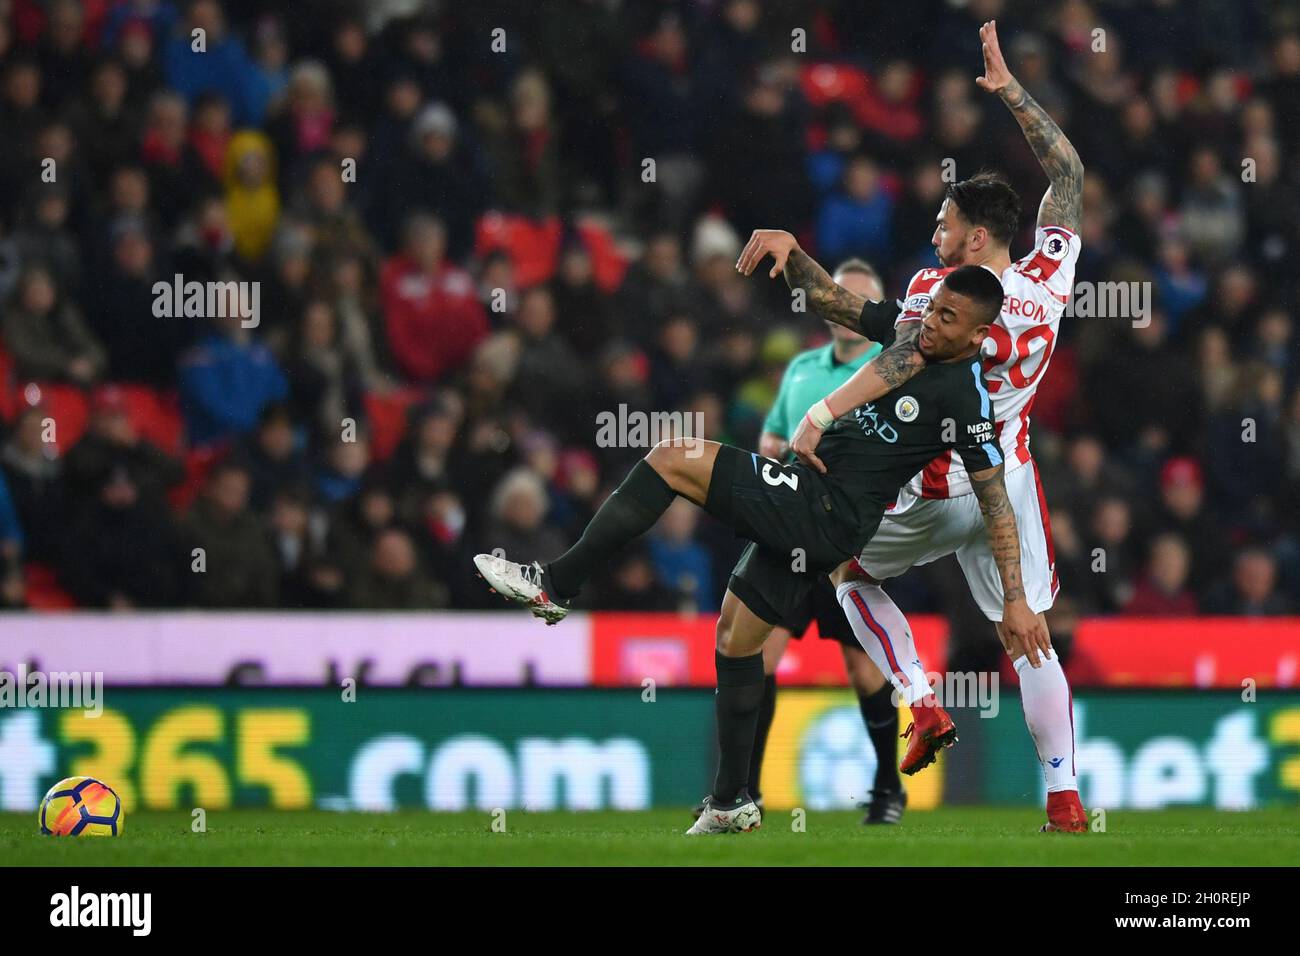 Manchester City's Gabriel Jesus is tackled by Stoke City's Geoff Cameron Stock Photo